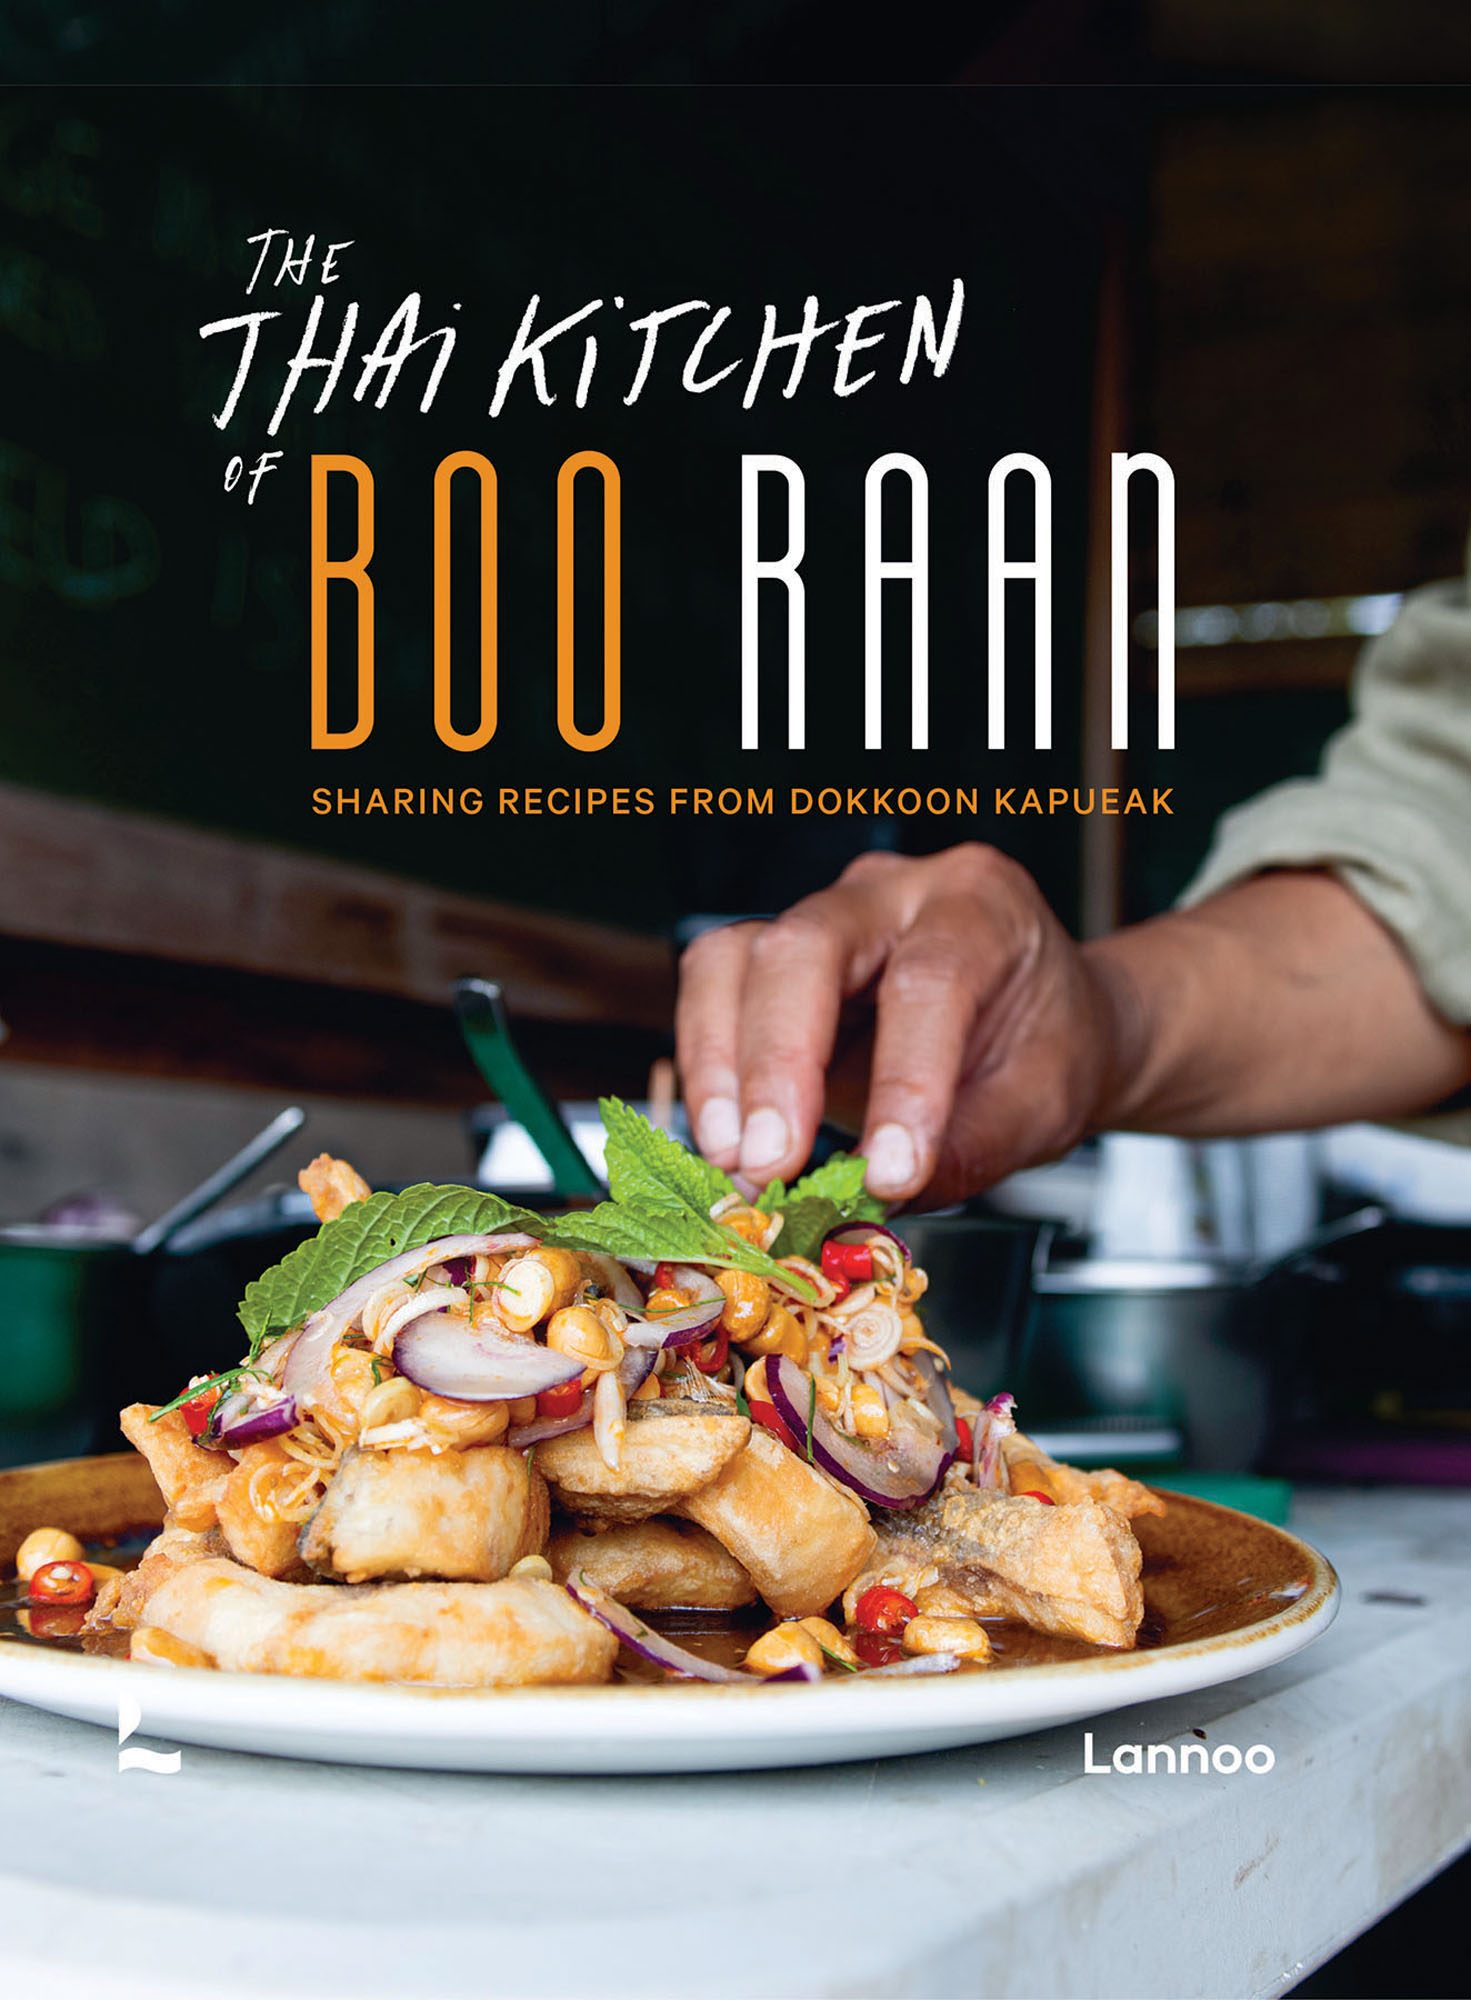 Asian style chicken dish on plate in restaurant kitchen with chef topping with herbs and The Thai Kitchen of Boo Raan in white and orange font